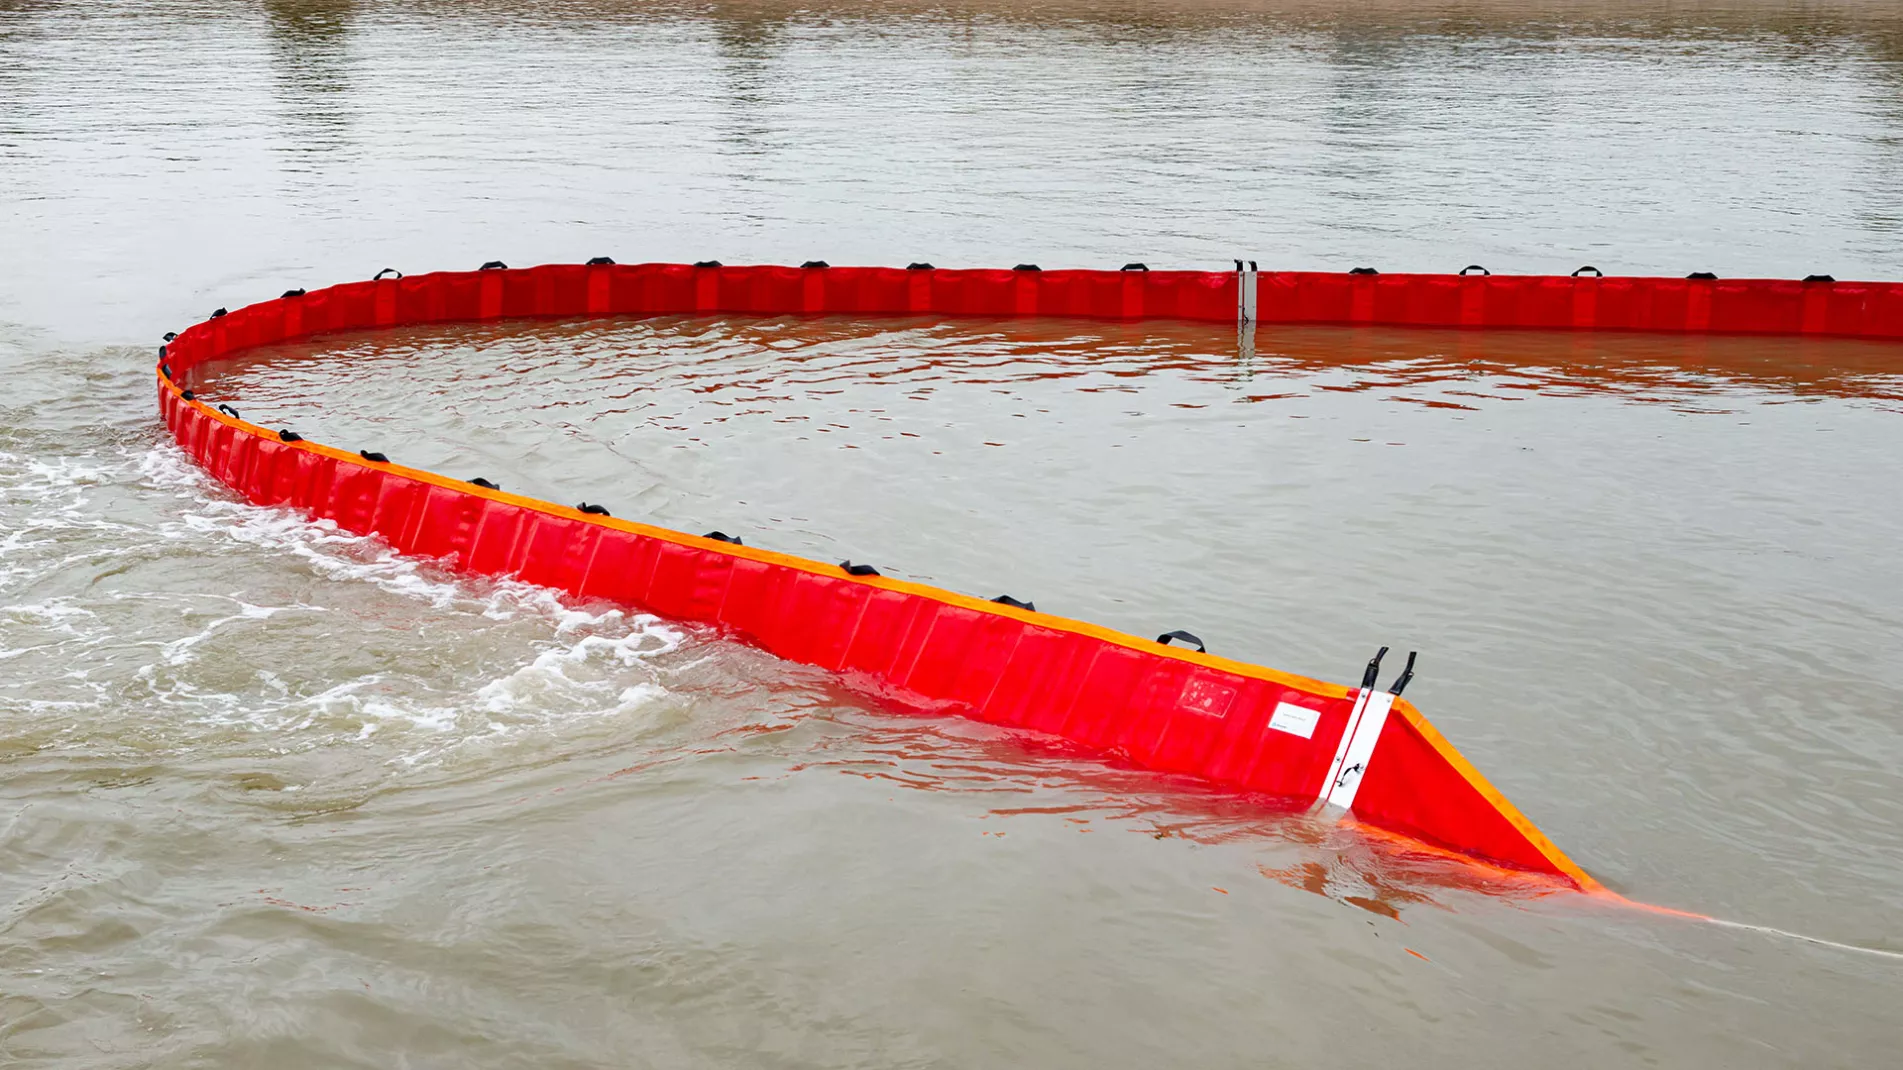 TOSCA Containment Barrier Equipment on exercise